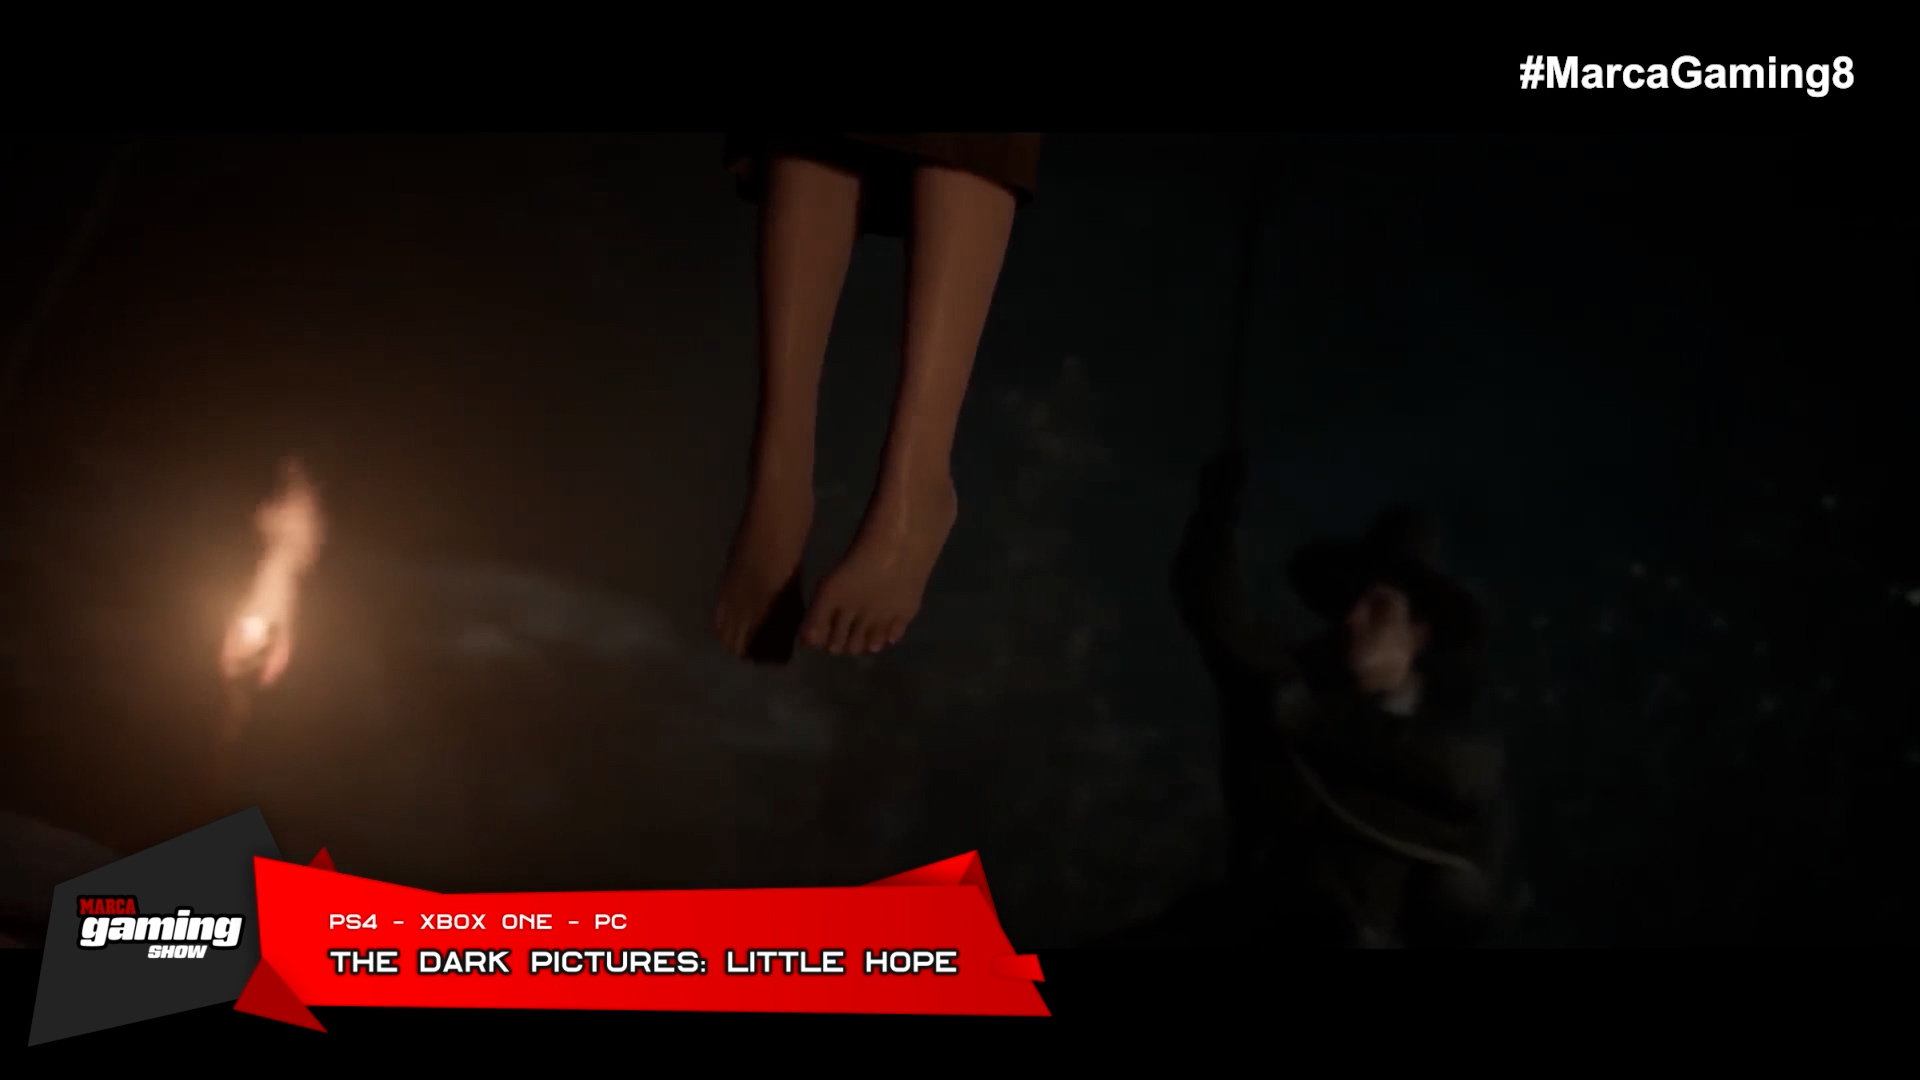 The Dark Pictures: Little Hope (PC - PS4 - XBOX ONE)